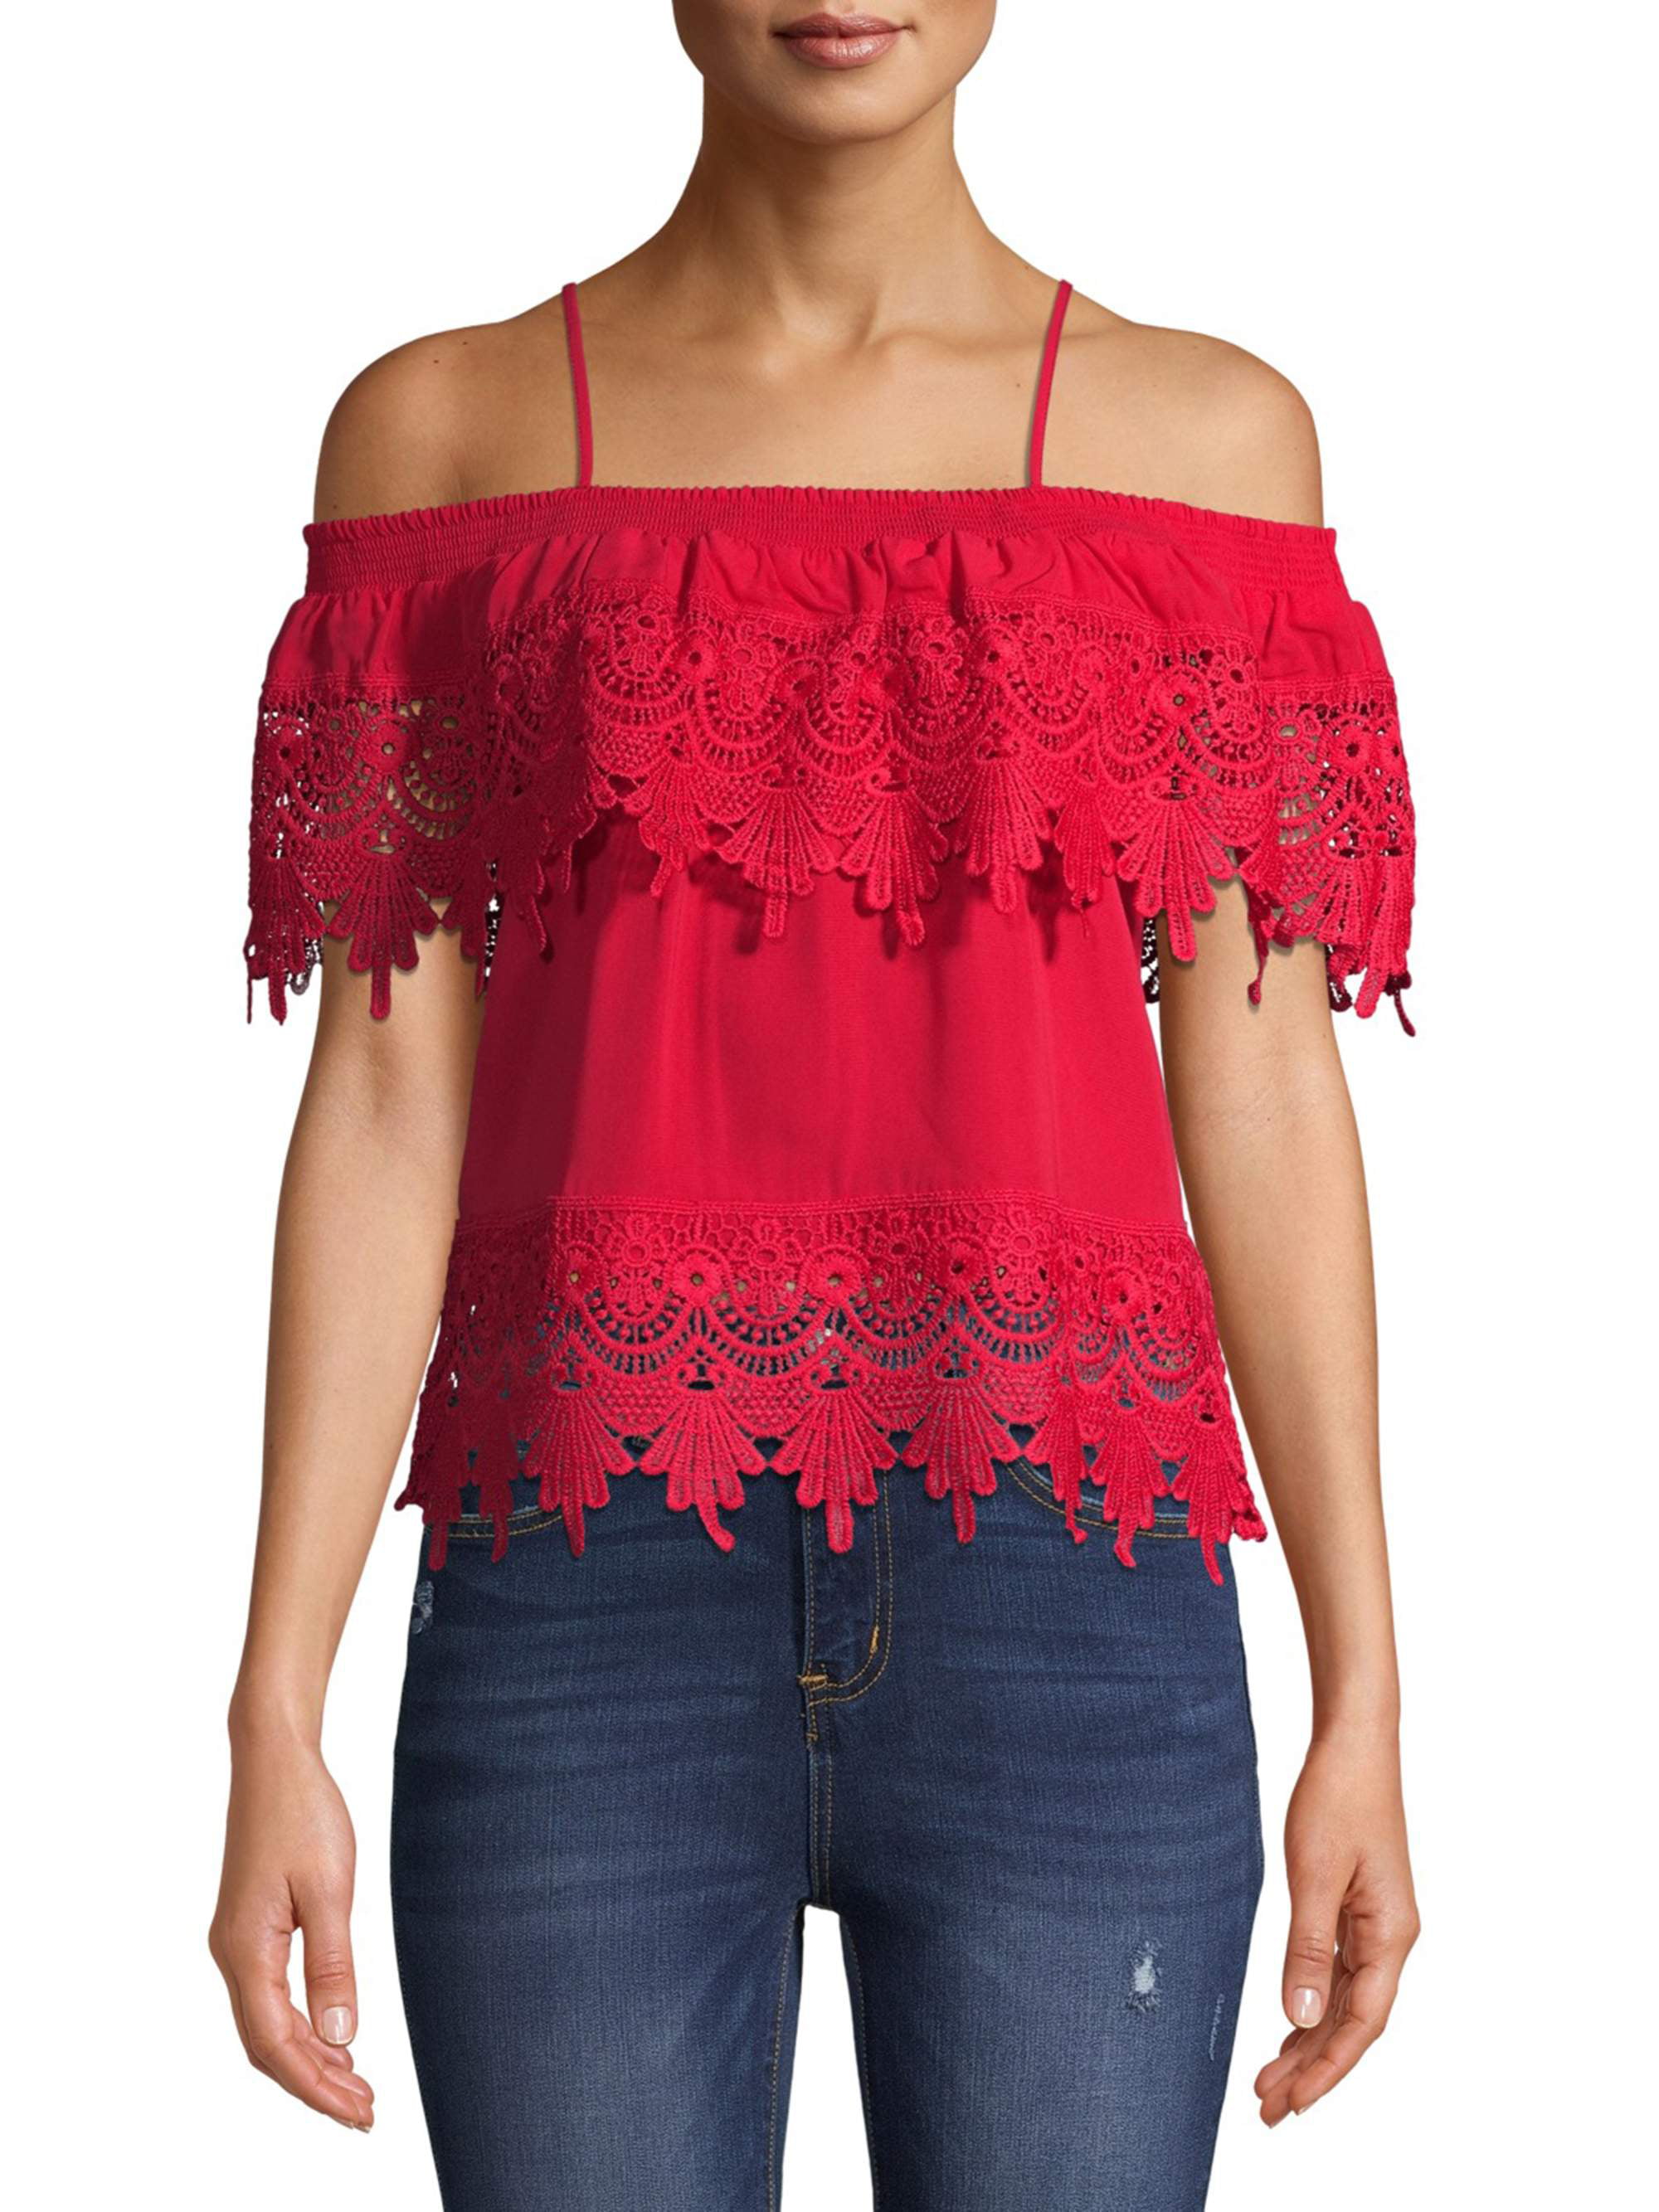 NWT EXPRESS LACE INSET RUFFLE TOP SIZE SMALL AND MEDIUM 